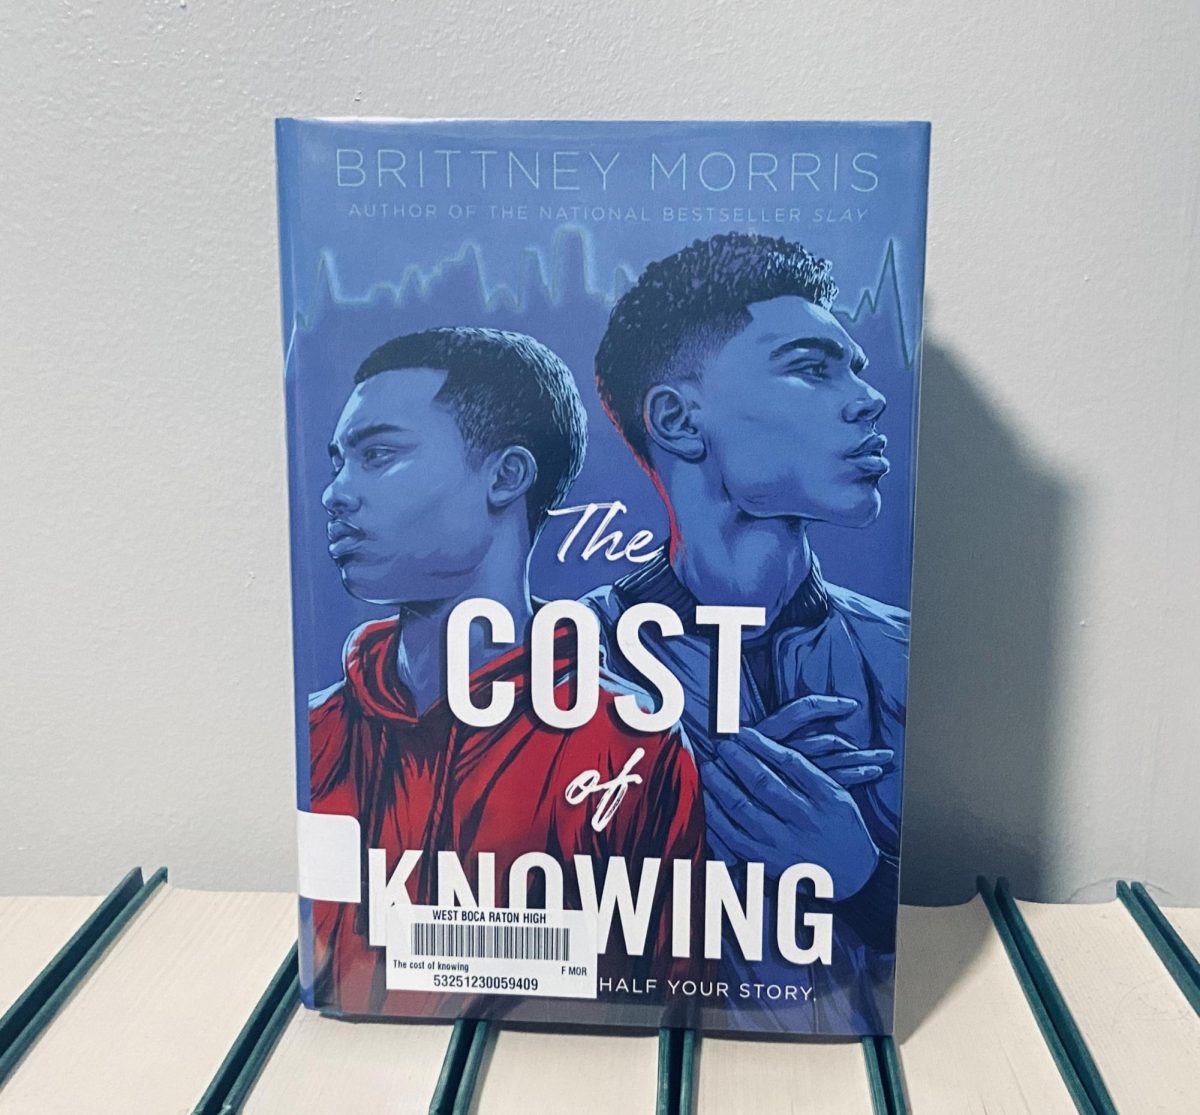 The Cost of Knowing by Brittney Morris which is on the Florida Teen Reads book list!